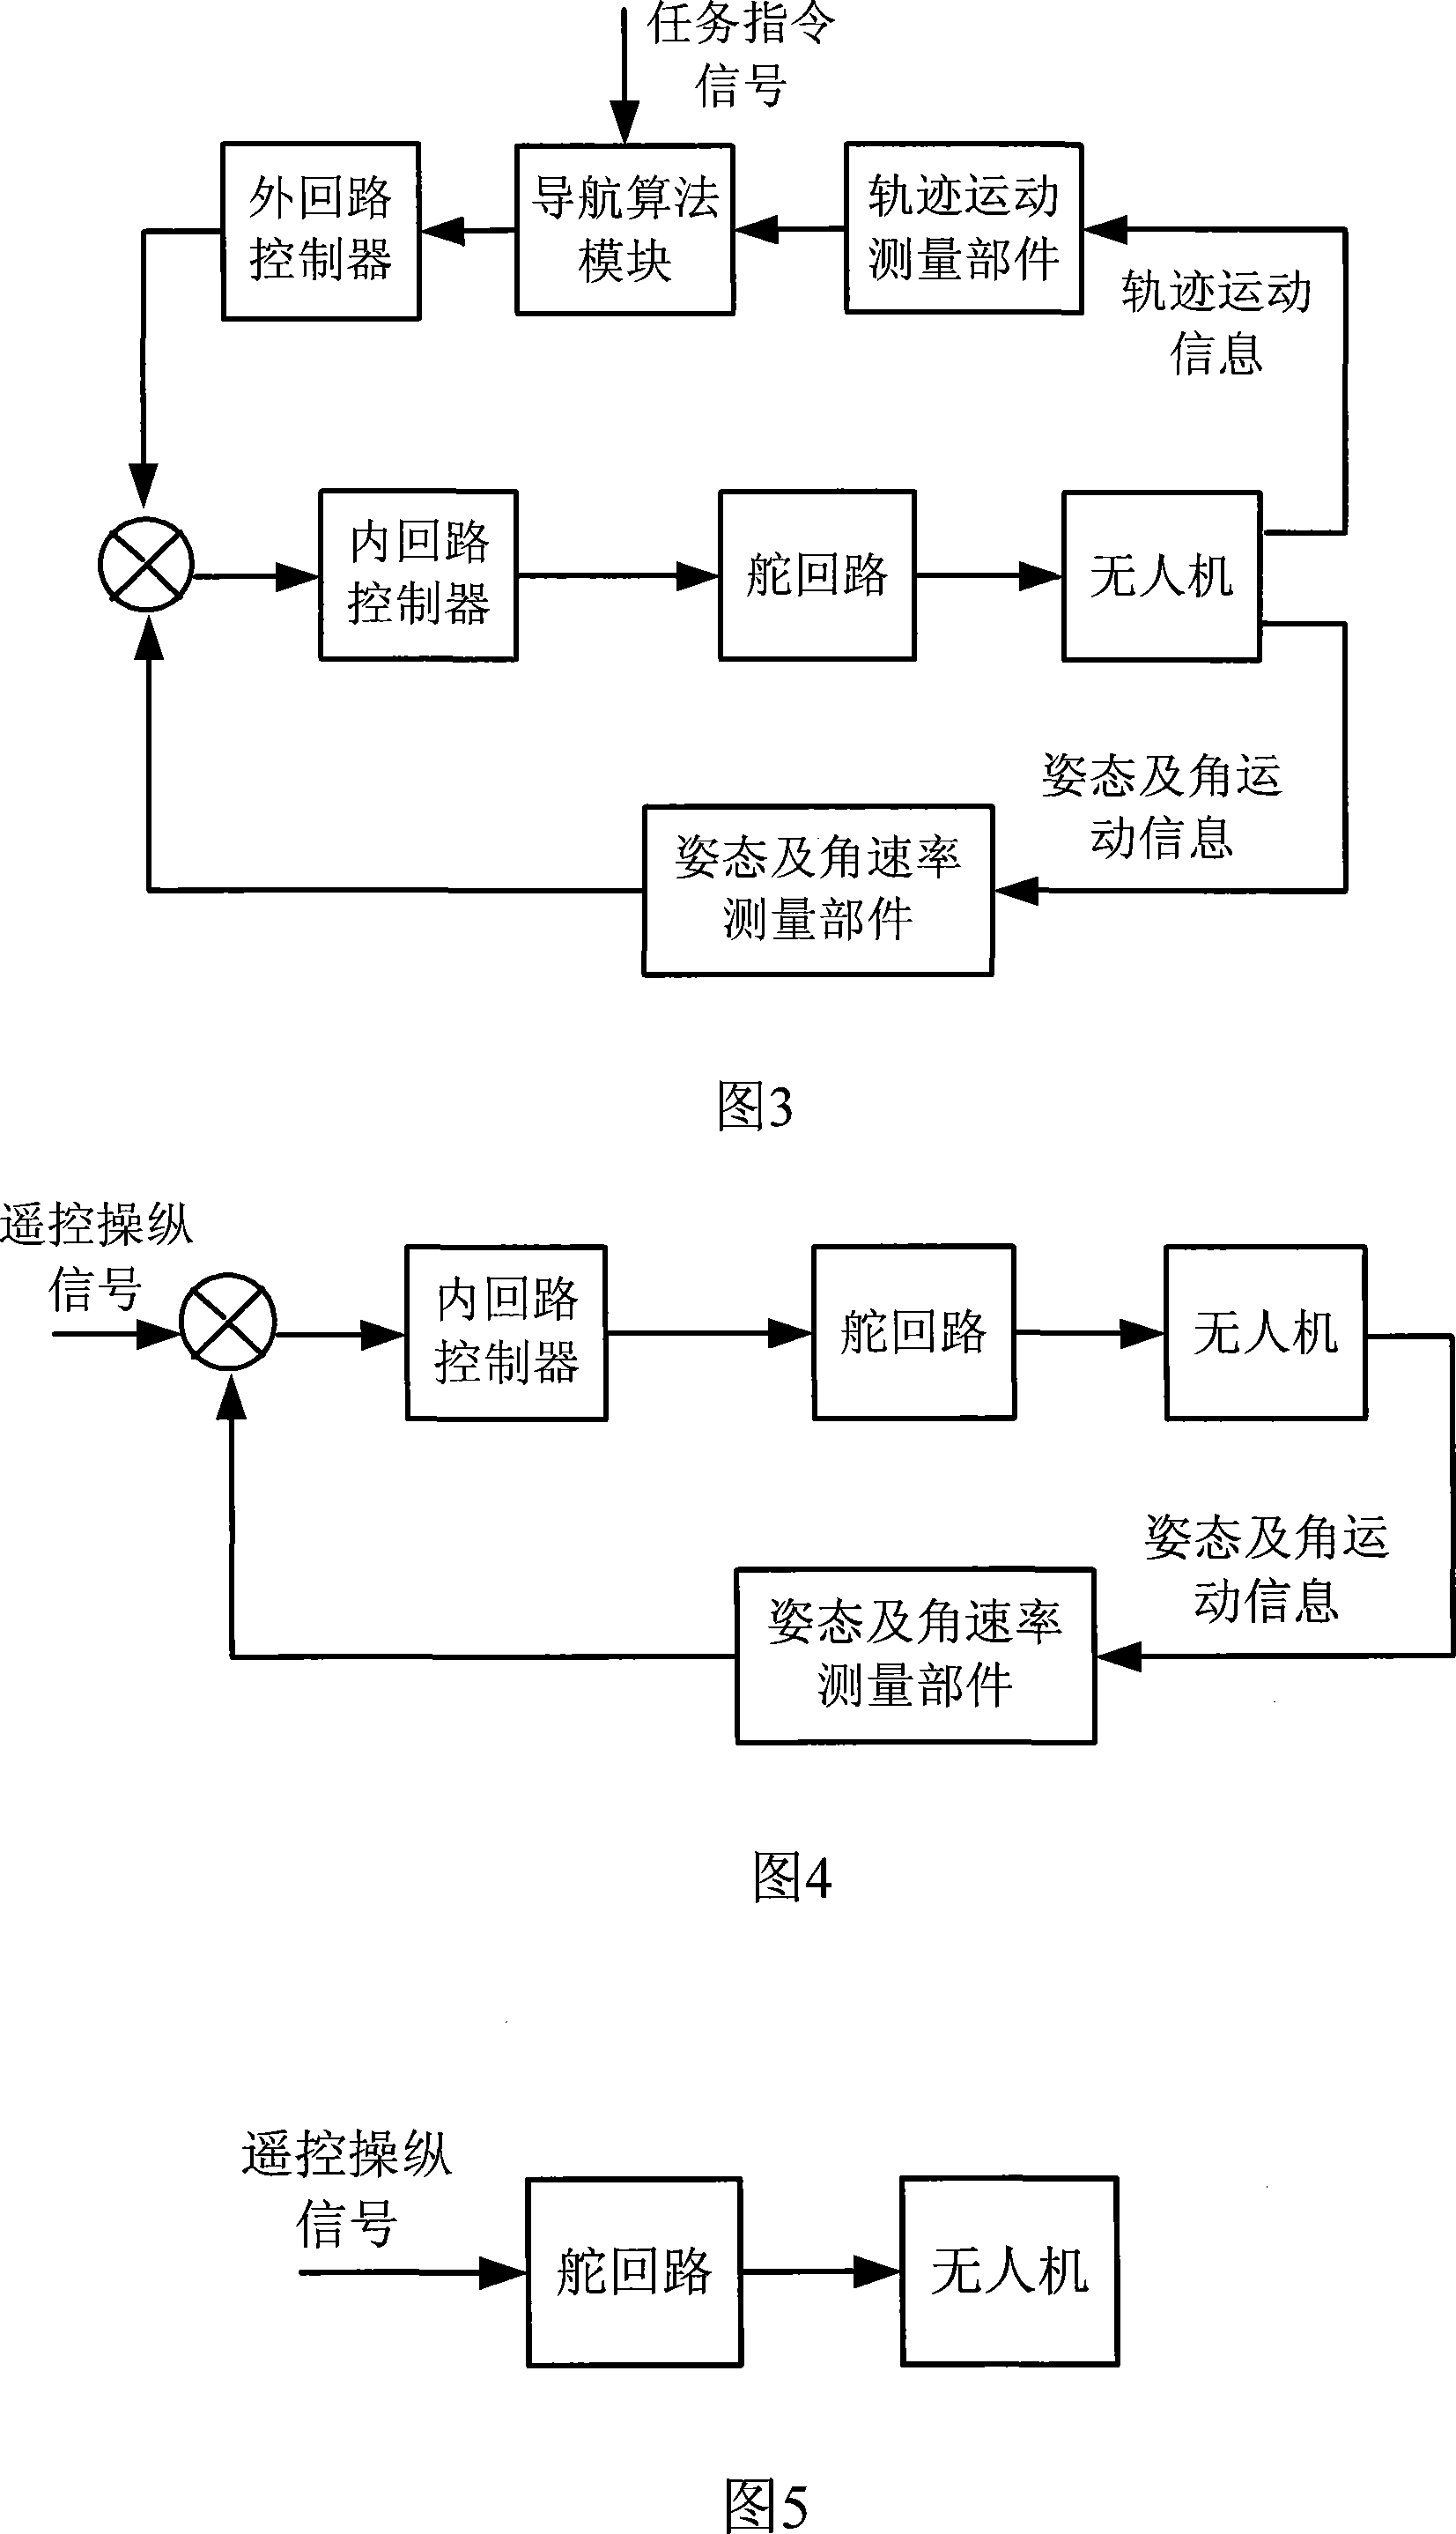 No-manned machine multi- mode control and switching method